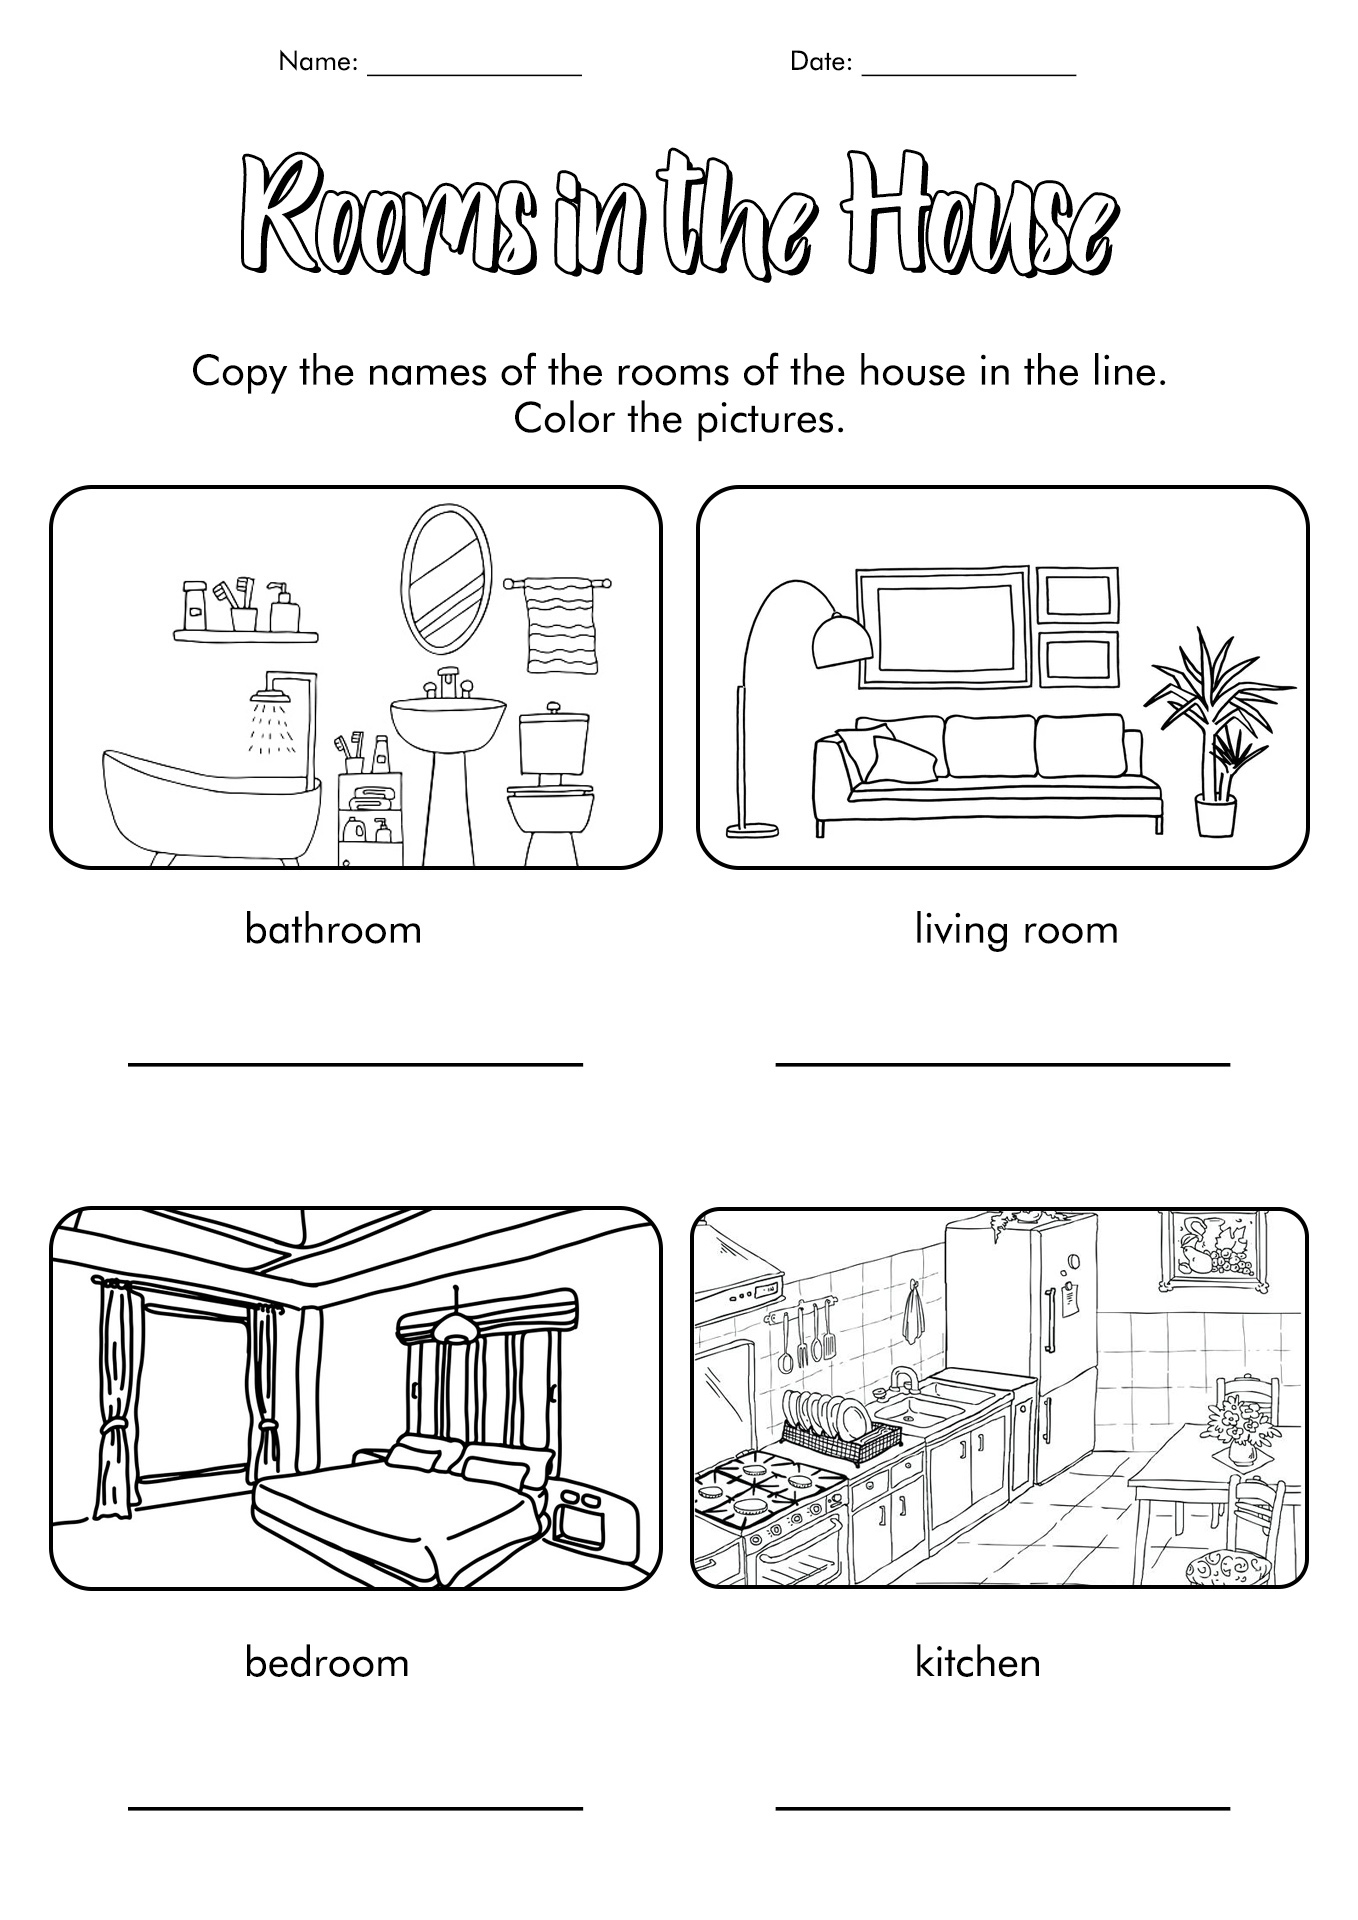 12 Best Images of White House Worksheets - Rooms in a House Worksheet ...